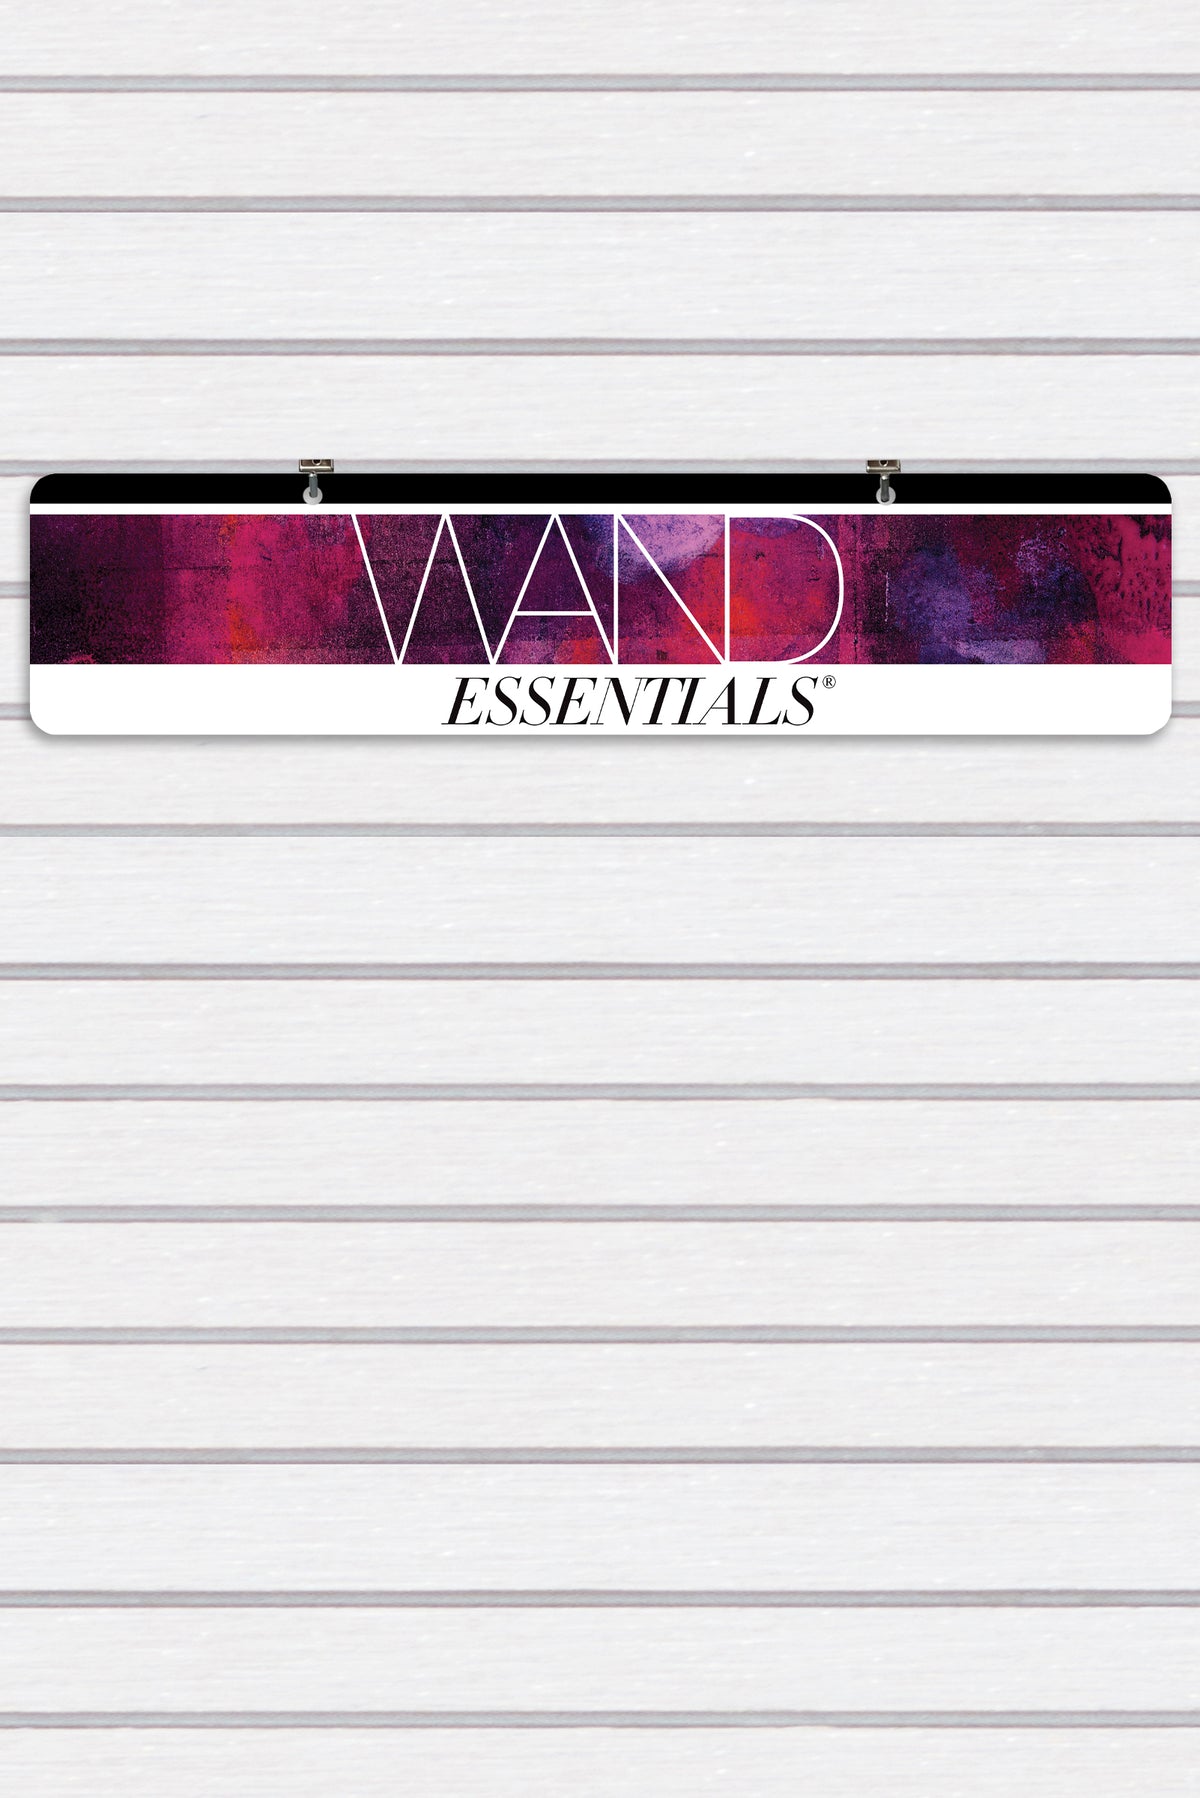 Wand Essentials Display Sign